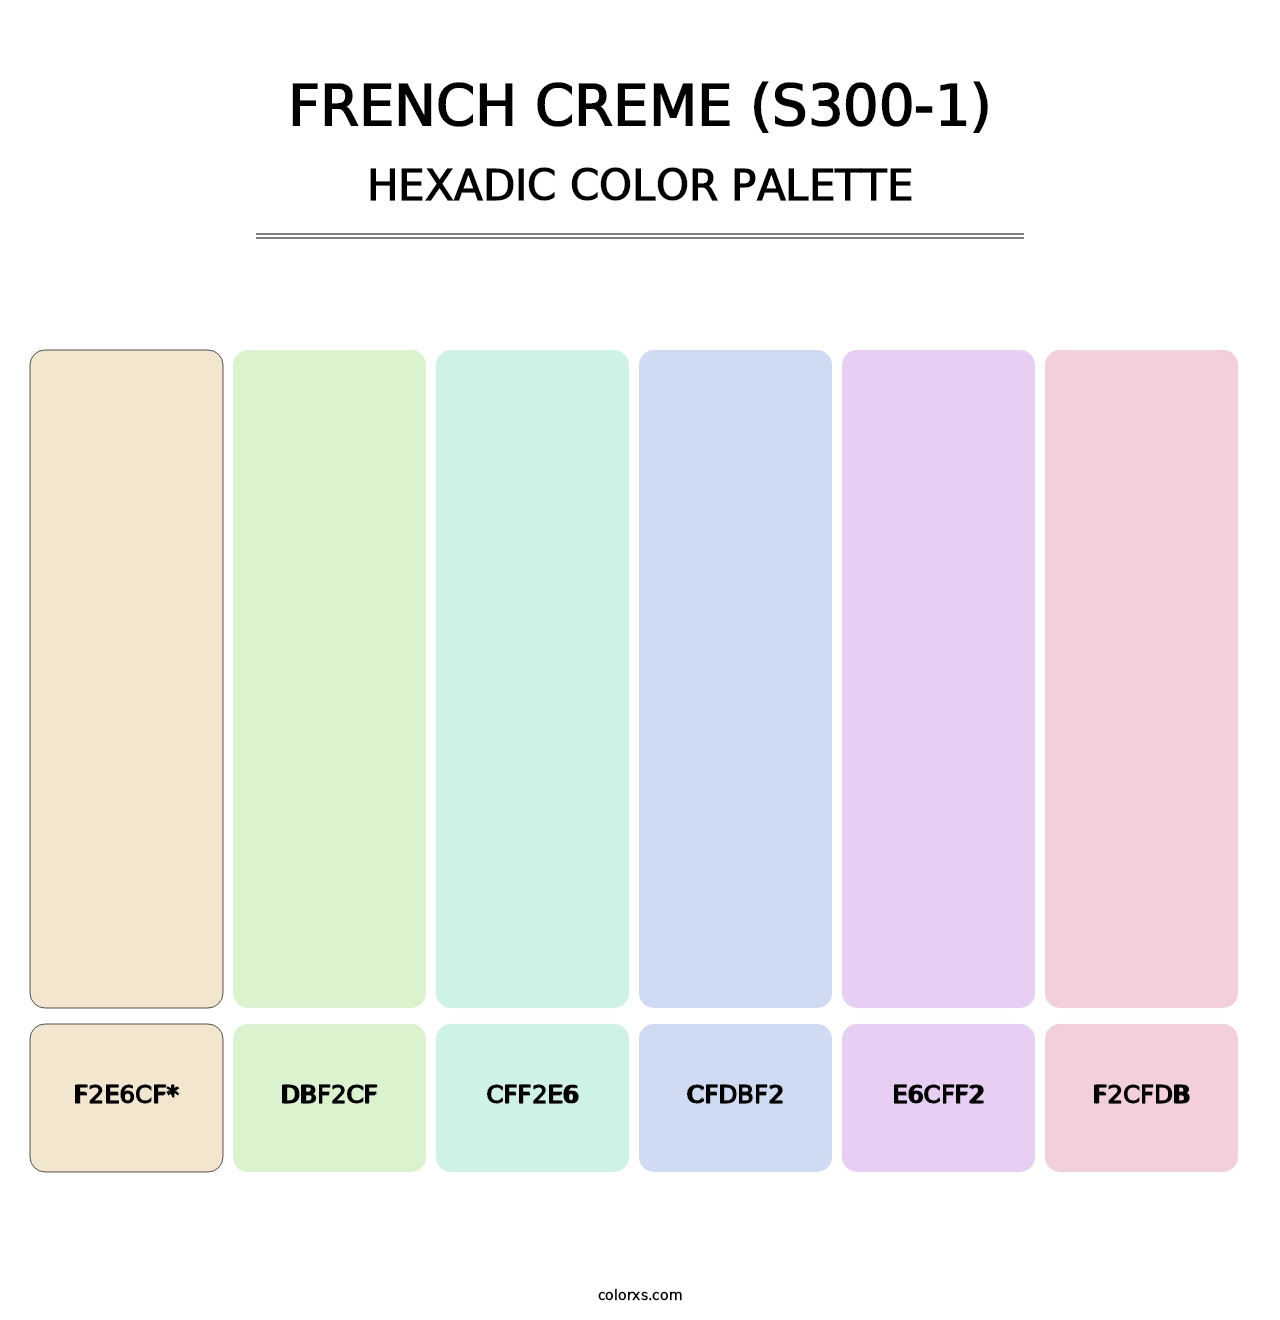 French Creme (S300-1) - Hexadic Color Palette